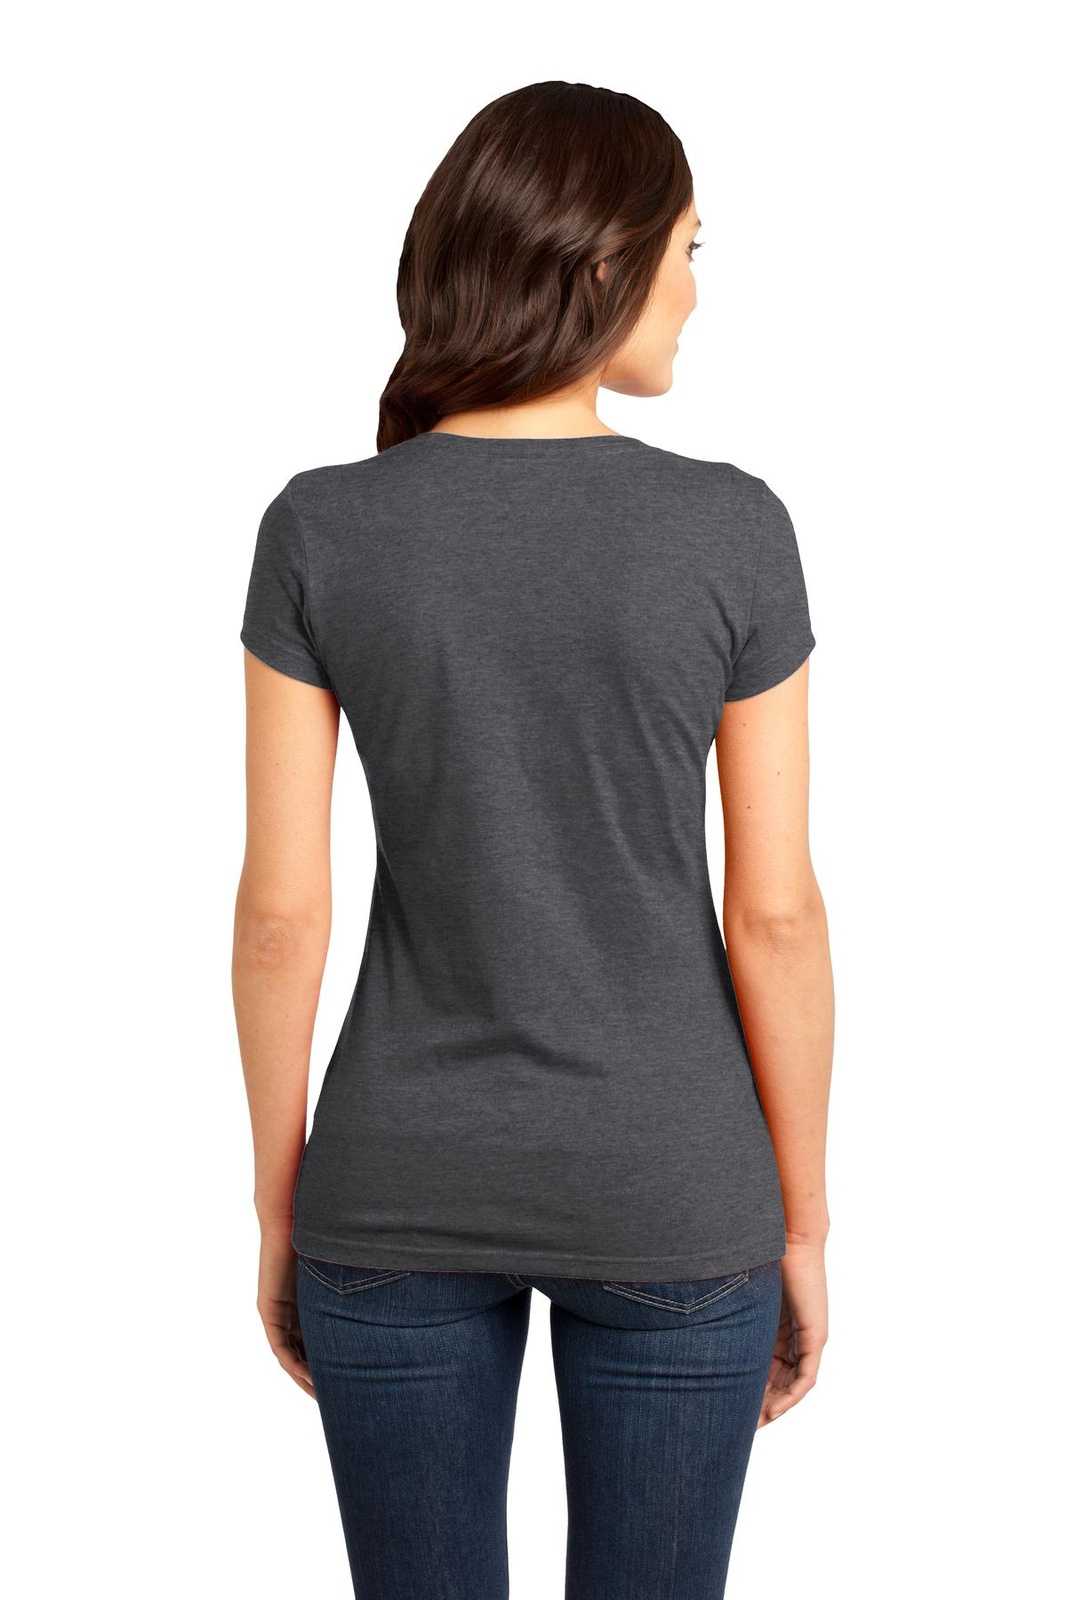 District DT6001 Women's Fitted Very Important Tee - Heathered Charcoal - HIT a Double - 1